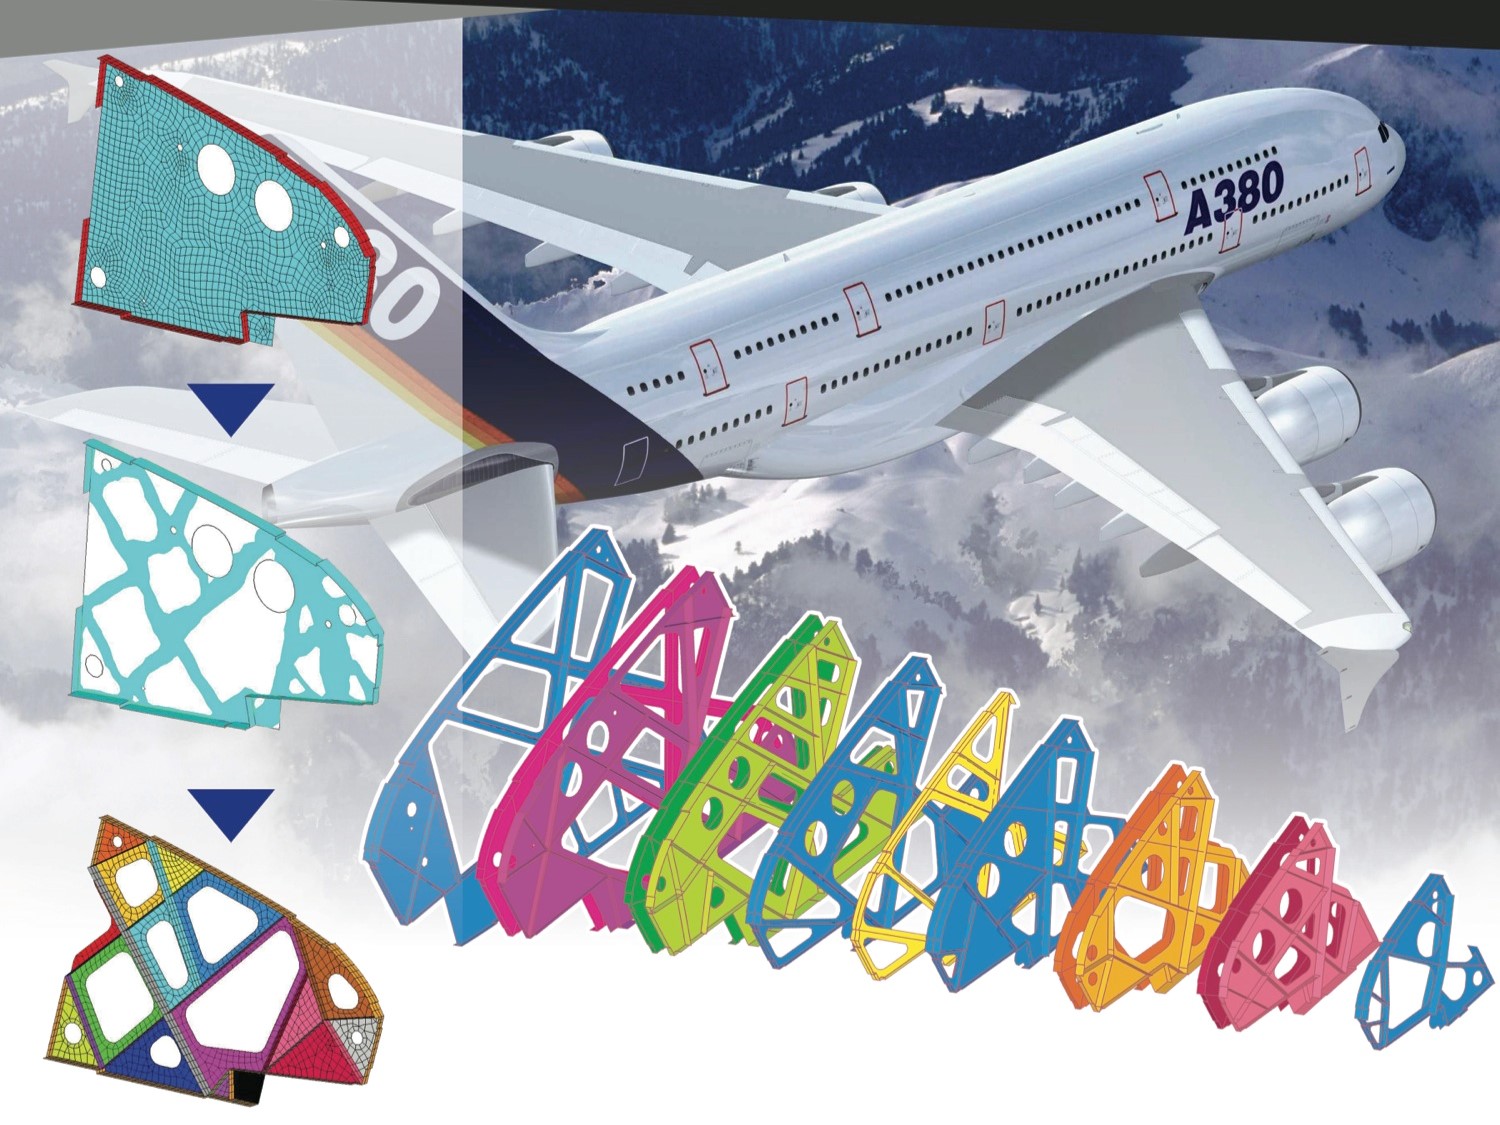 Airbus Aircraft: Global Employment of HyperWorks Solutions